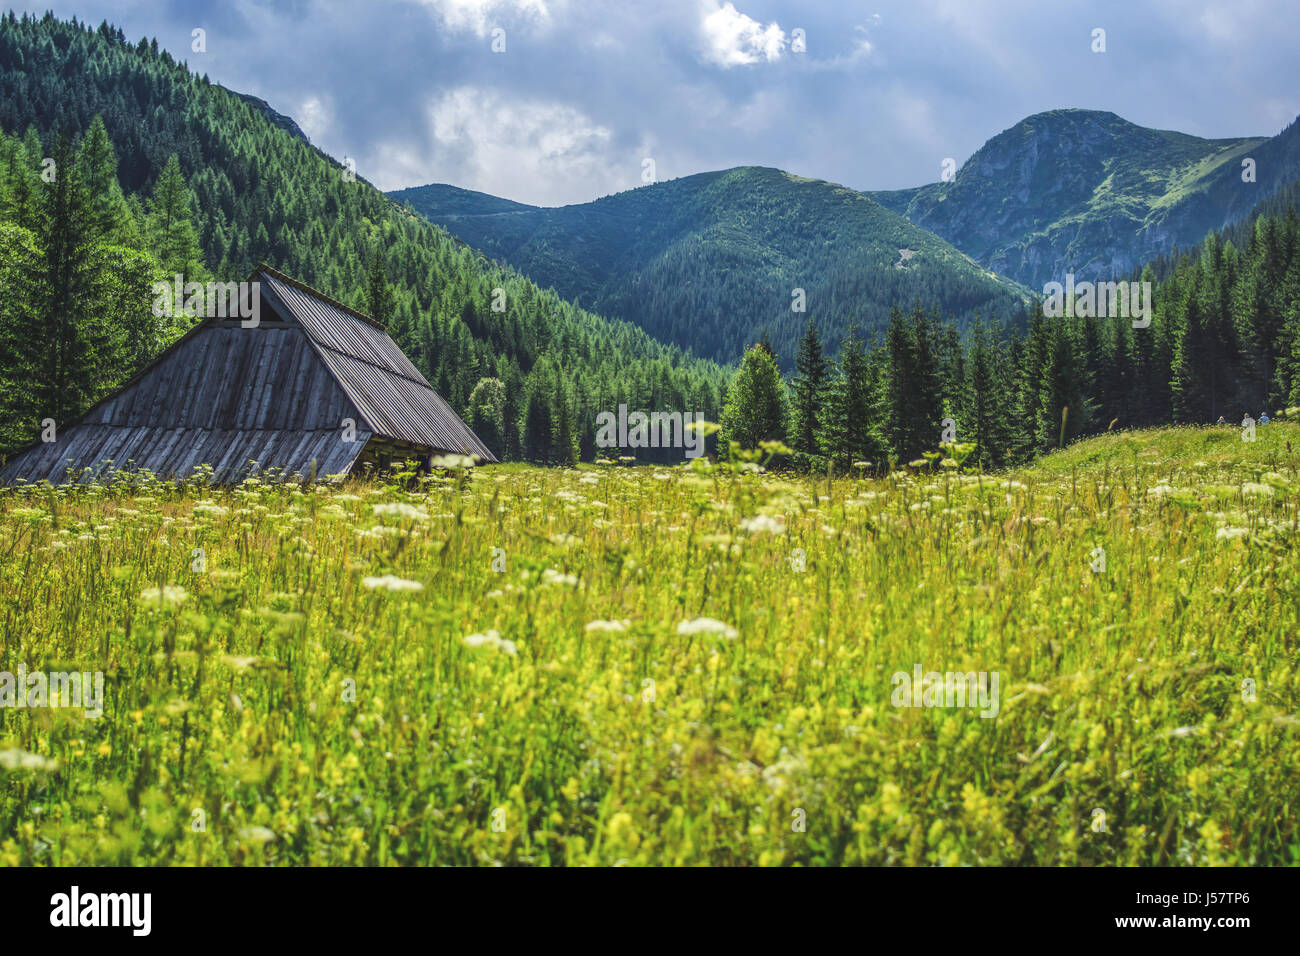 Dolina Jaworzynka, a valley in the Polish Tatra mountains with wooden houses. Stock Photo